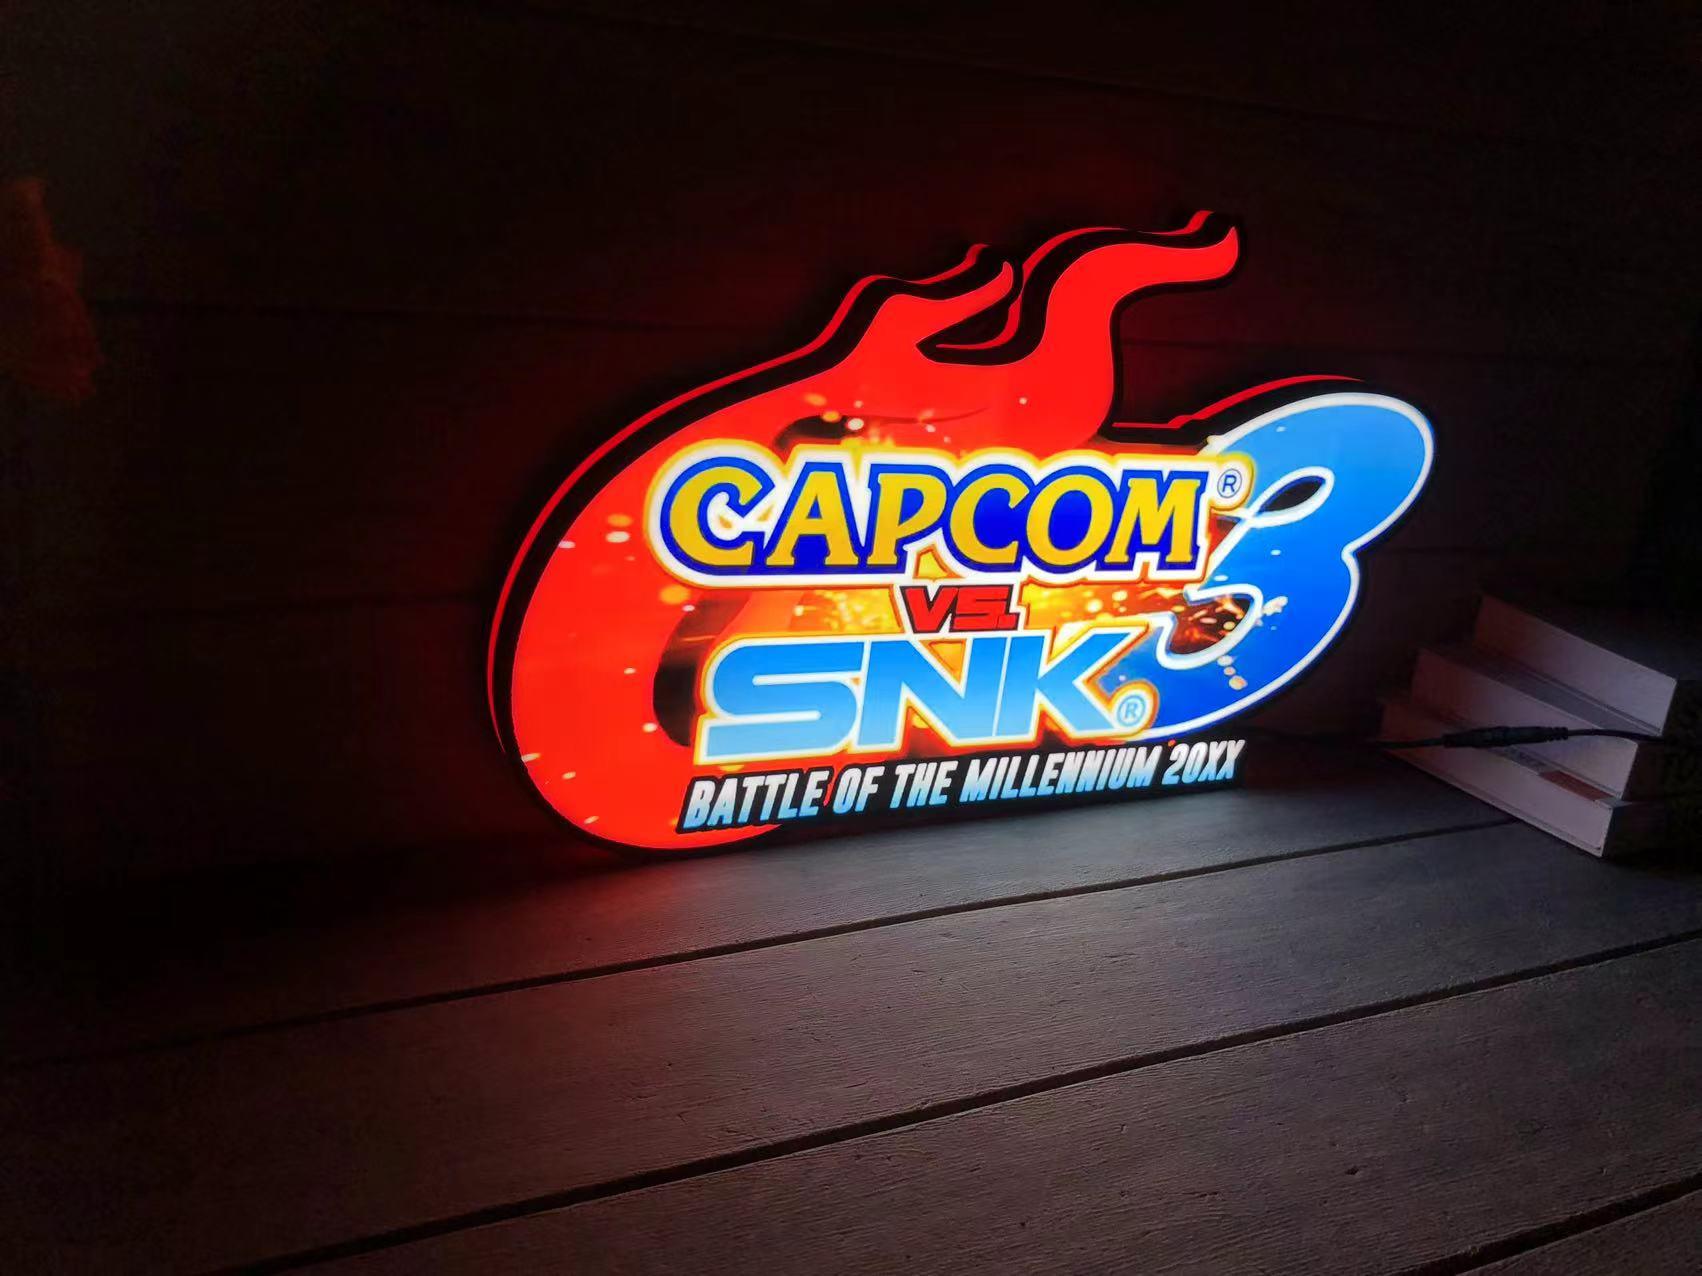 SNK vs. Capcom, Classic Arcade LED Light Box, Classic Fighting Game Arcade Toppers, LED Lightbox Pinball Topper - FYLZGO Signs